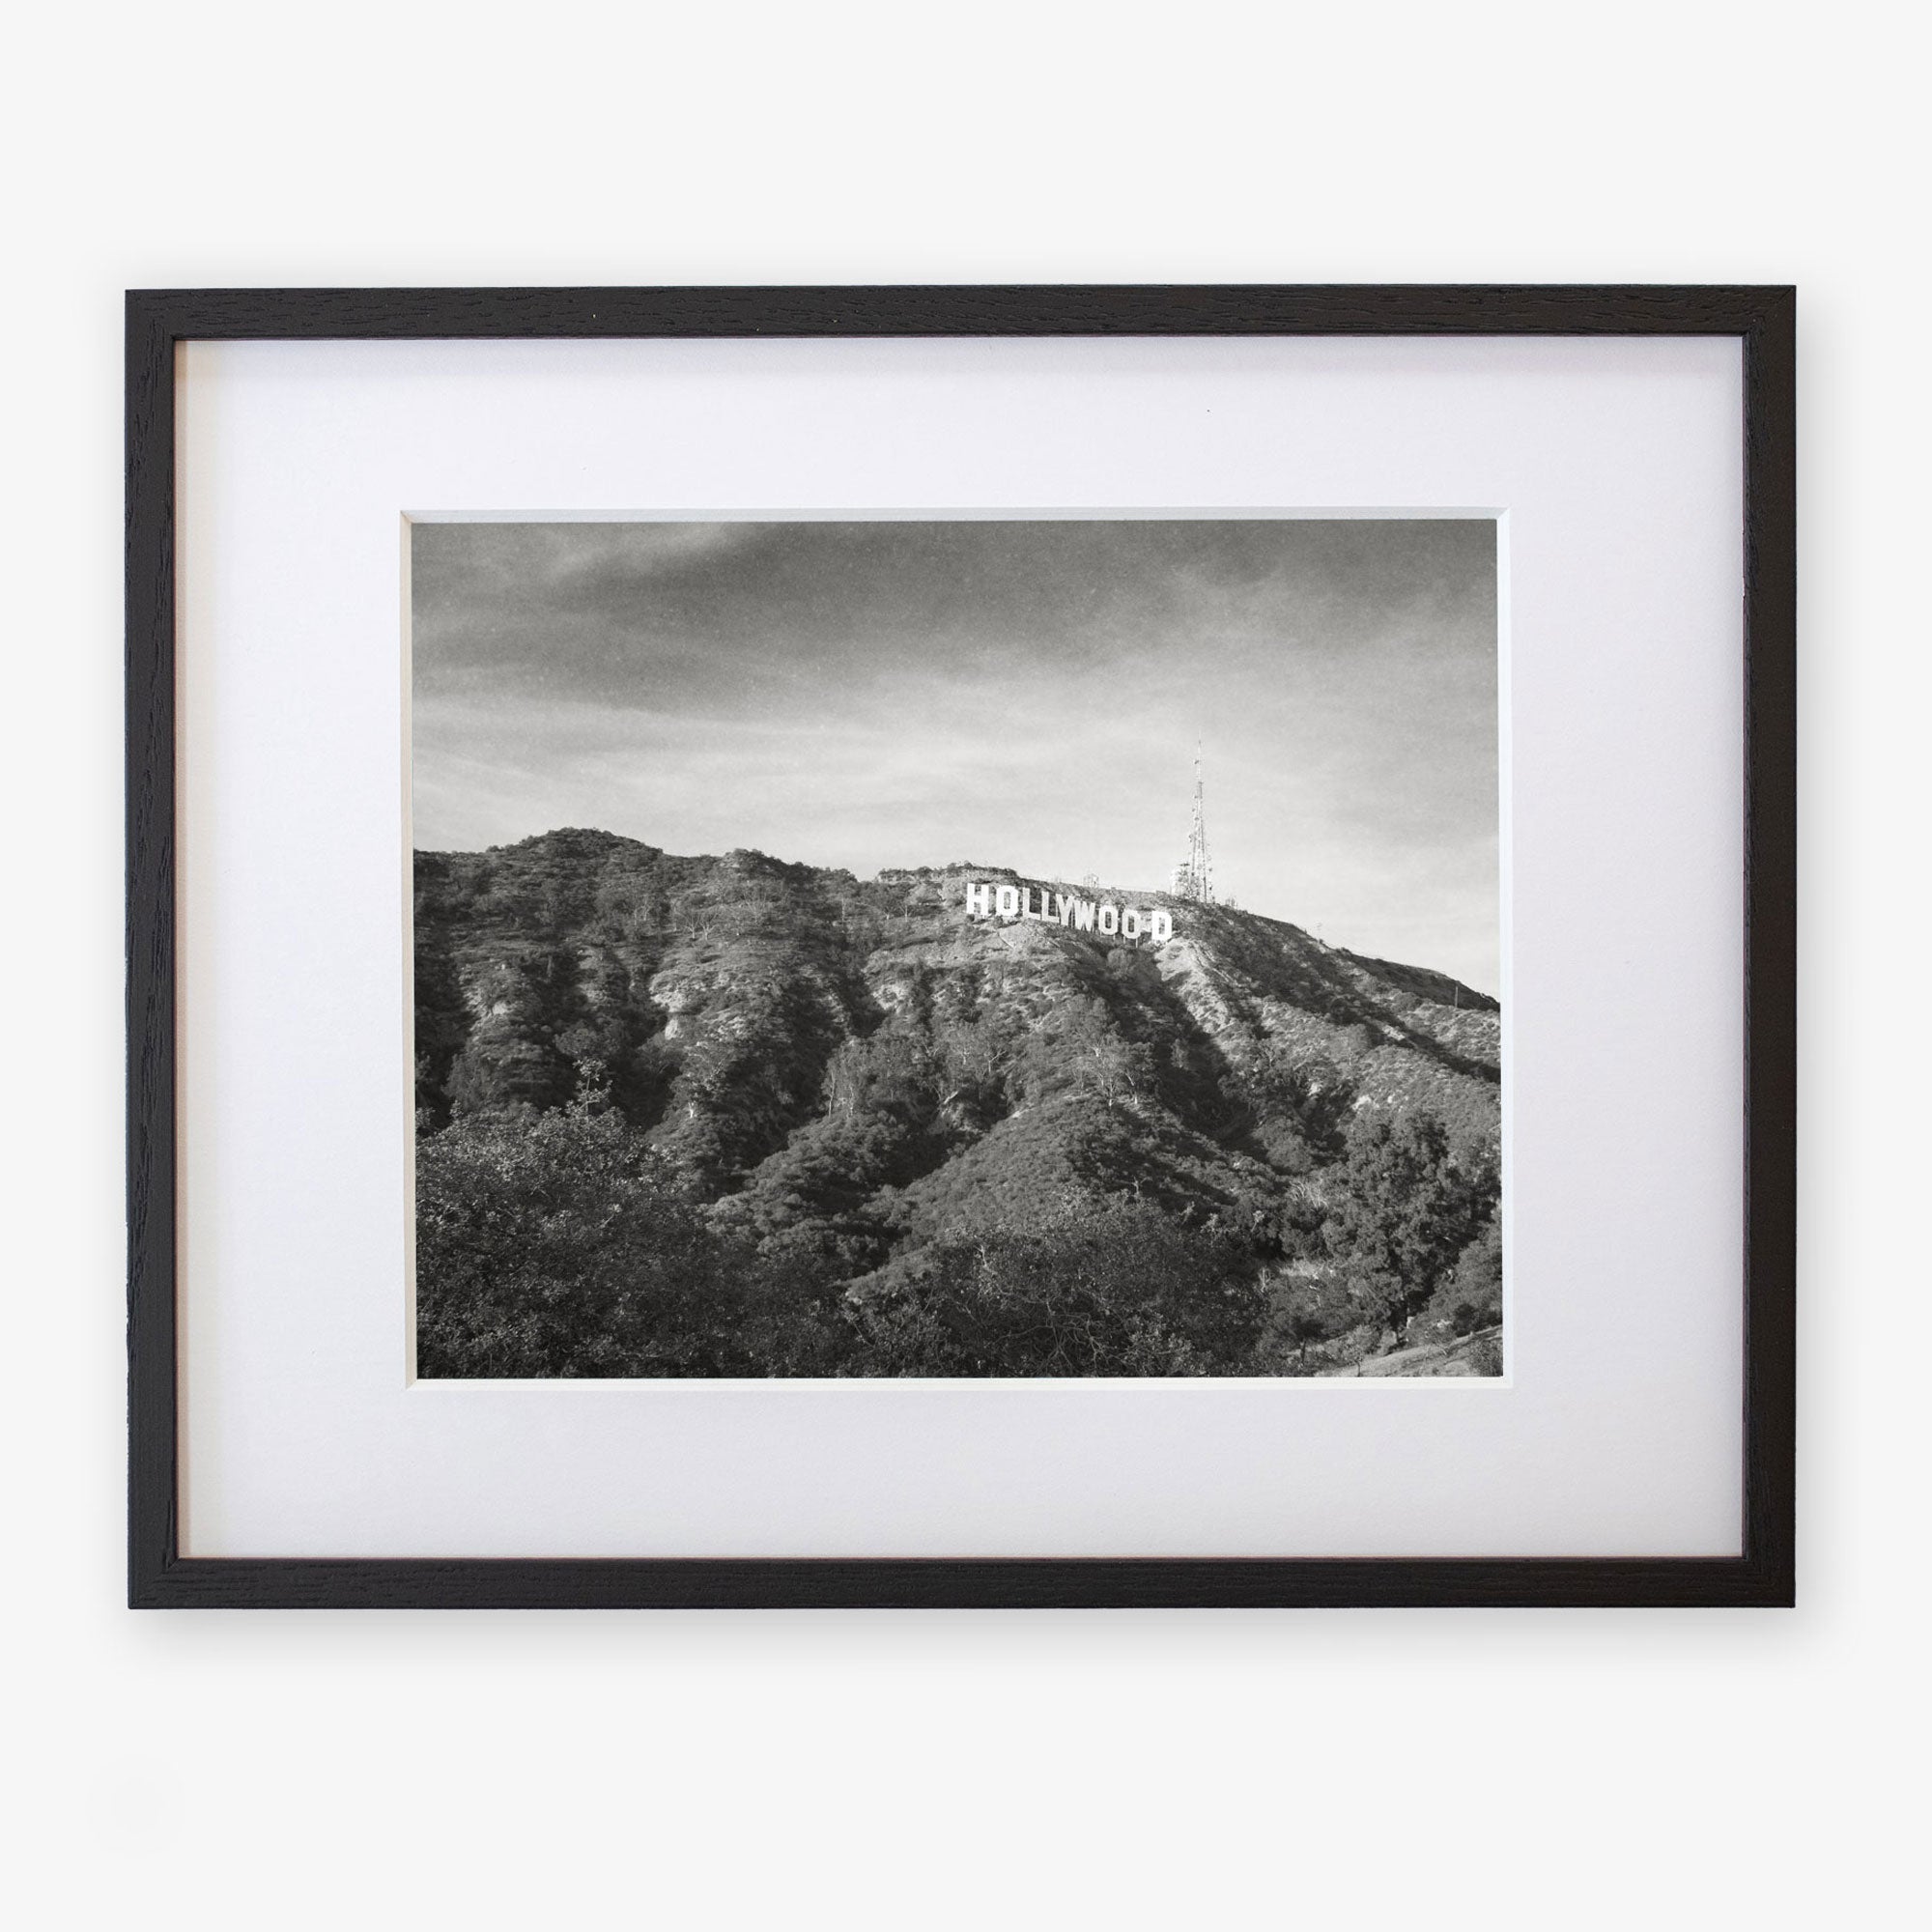 Offley Green&#39;s &#39;Old Hollywood&#39; Hollywood Sign Black and White Vintage Print, depicting the iconic Hollywood sign set on a hill, surrounded by lush vegetation, printed on archival photographic paper, with a clear sky in the background.